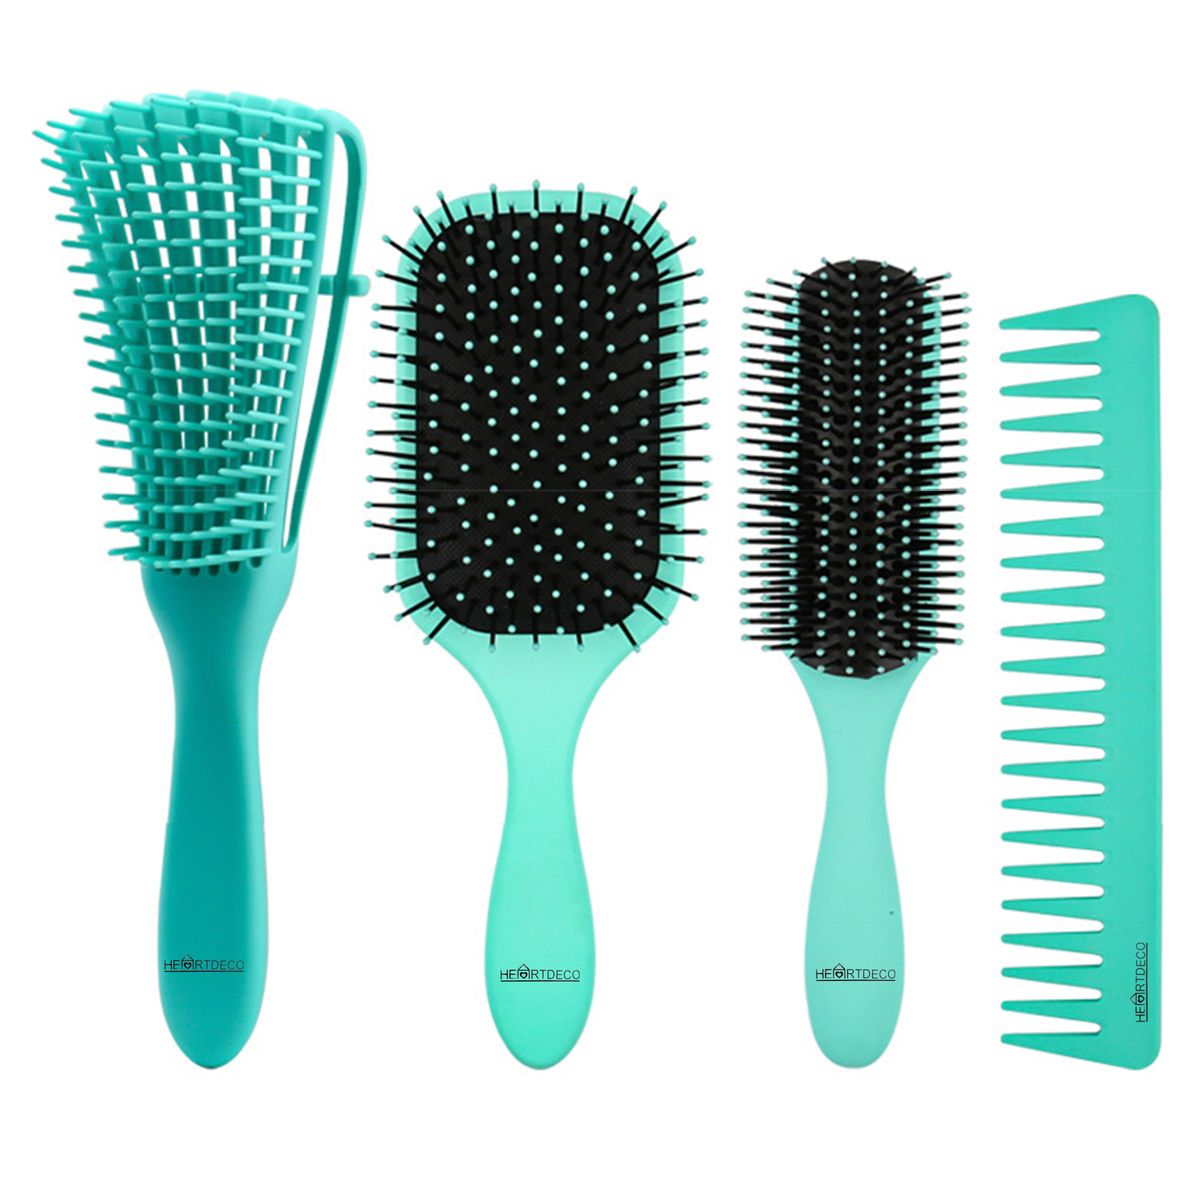 Heartdeco Detangling Paddle Hair Brush Blow Dry Styling Comb 4 Piece Set |  Buy Online in South Africa 